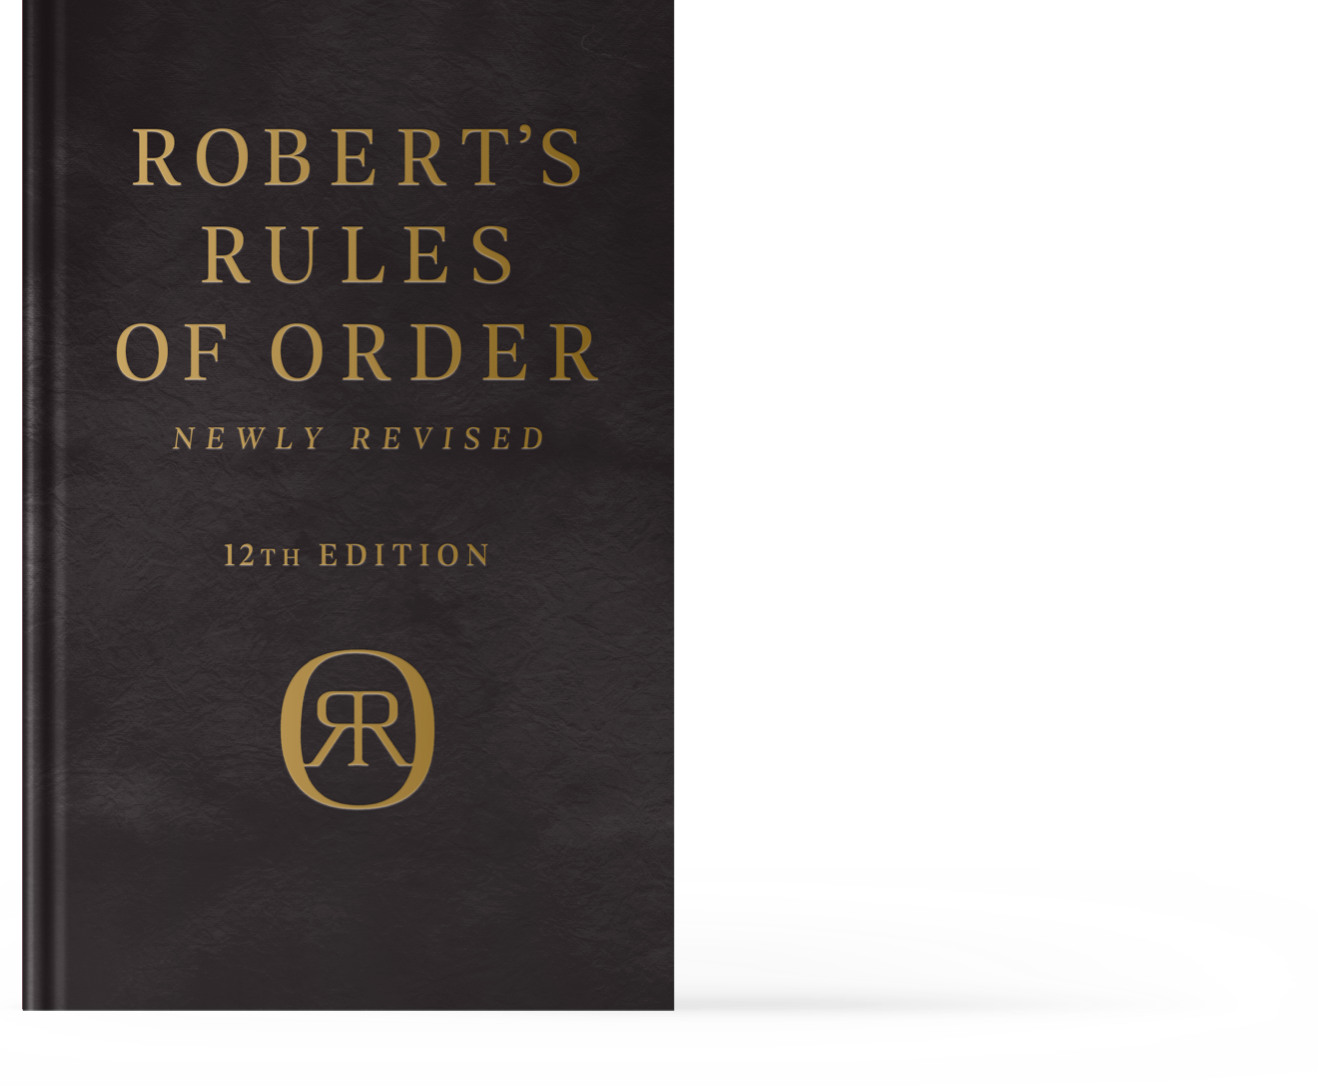  Rules of Order: Books